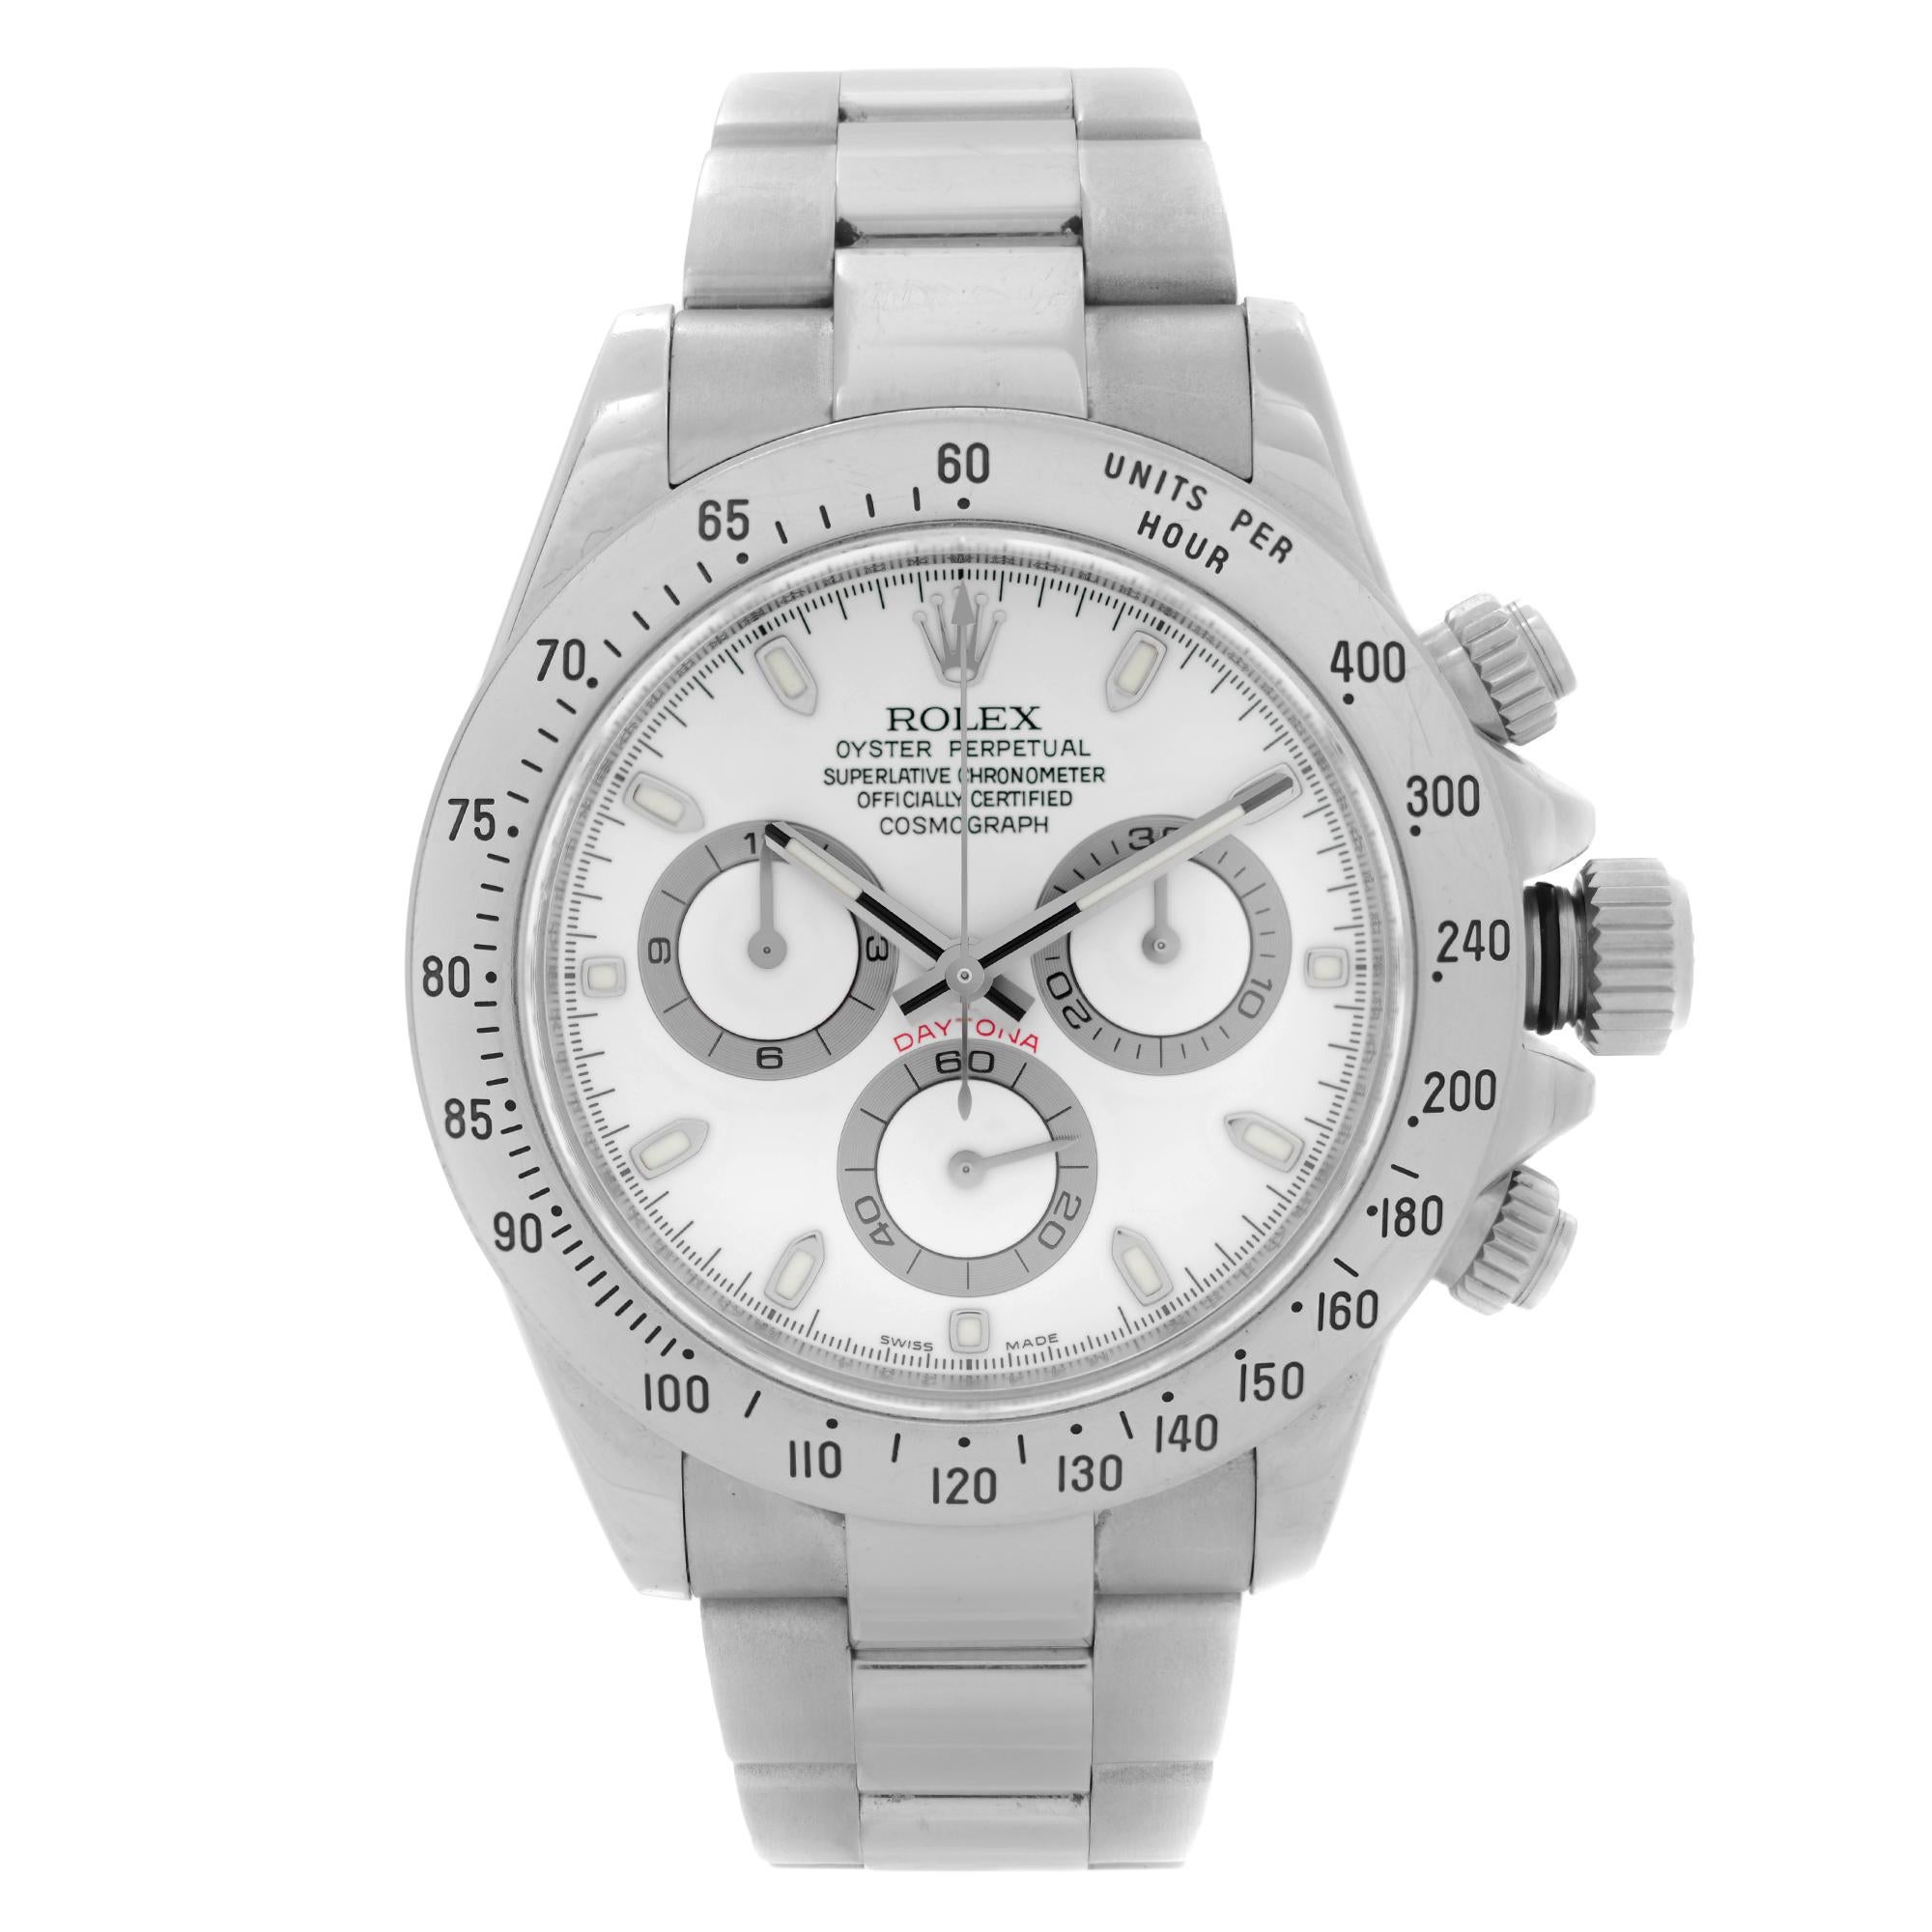 Rolex Daytona Cosmograph Stainless Steel White Dial Automatic Mens Watch 116520